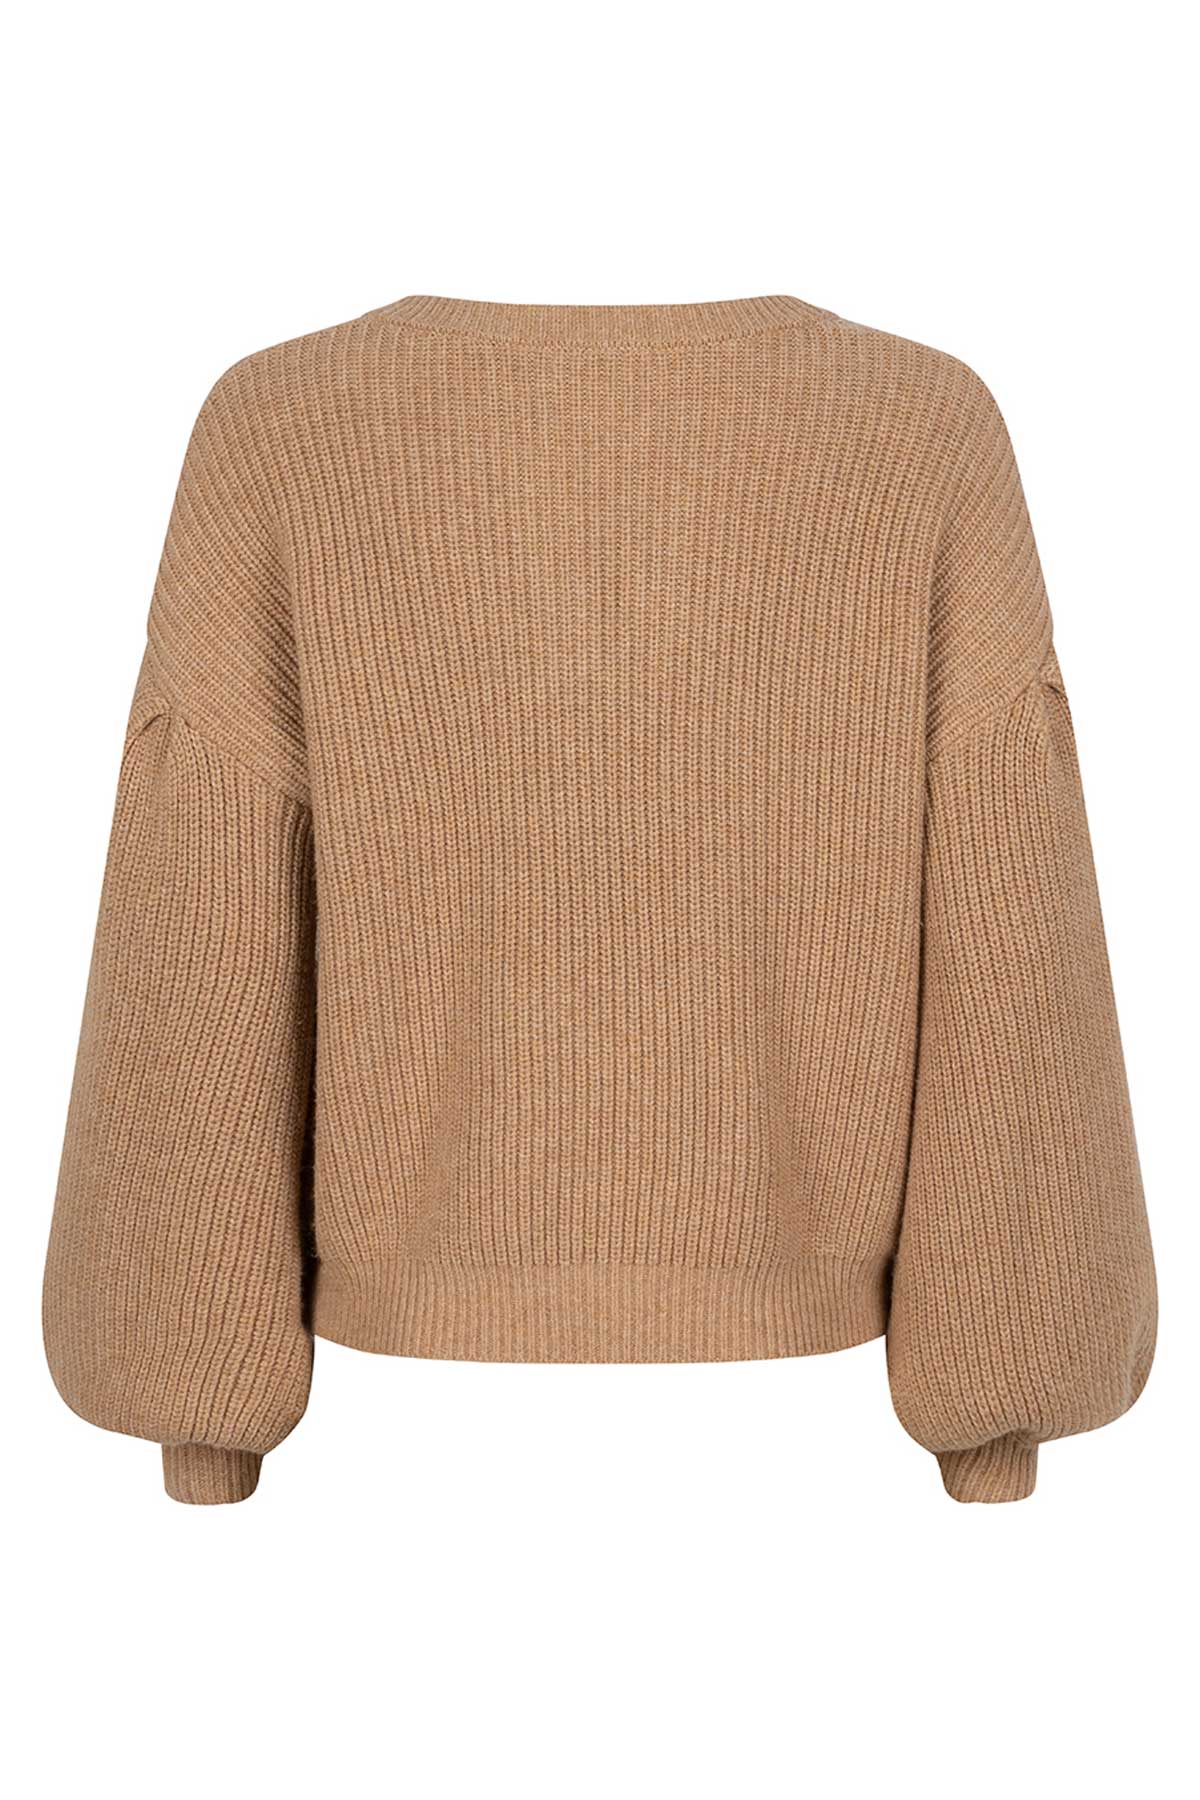 Ruby Tuesday | Vianca Sweater Camel